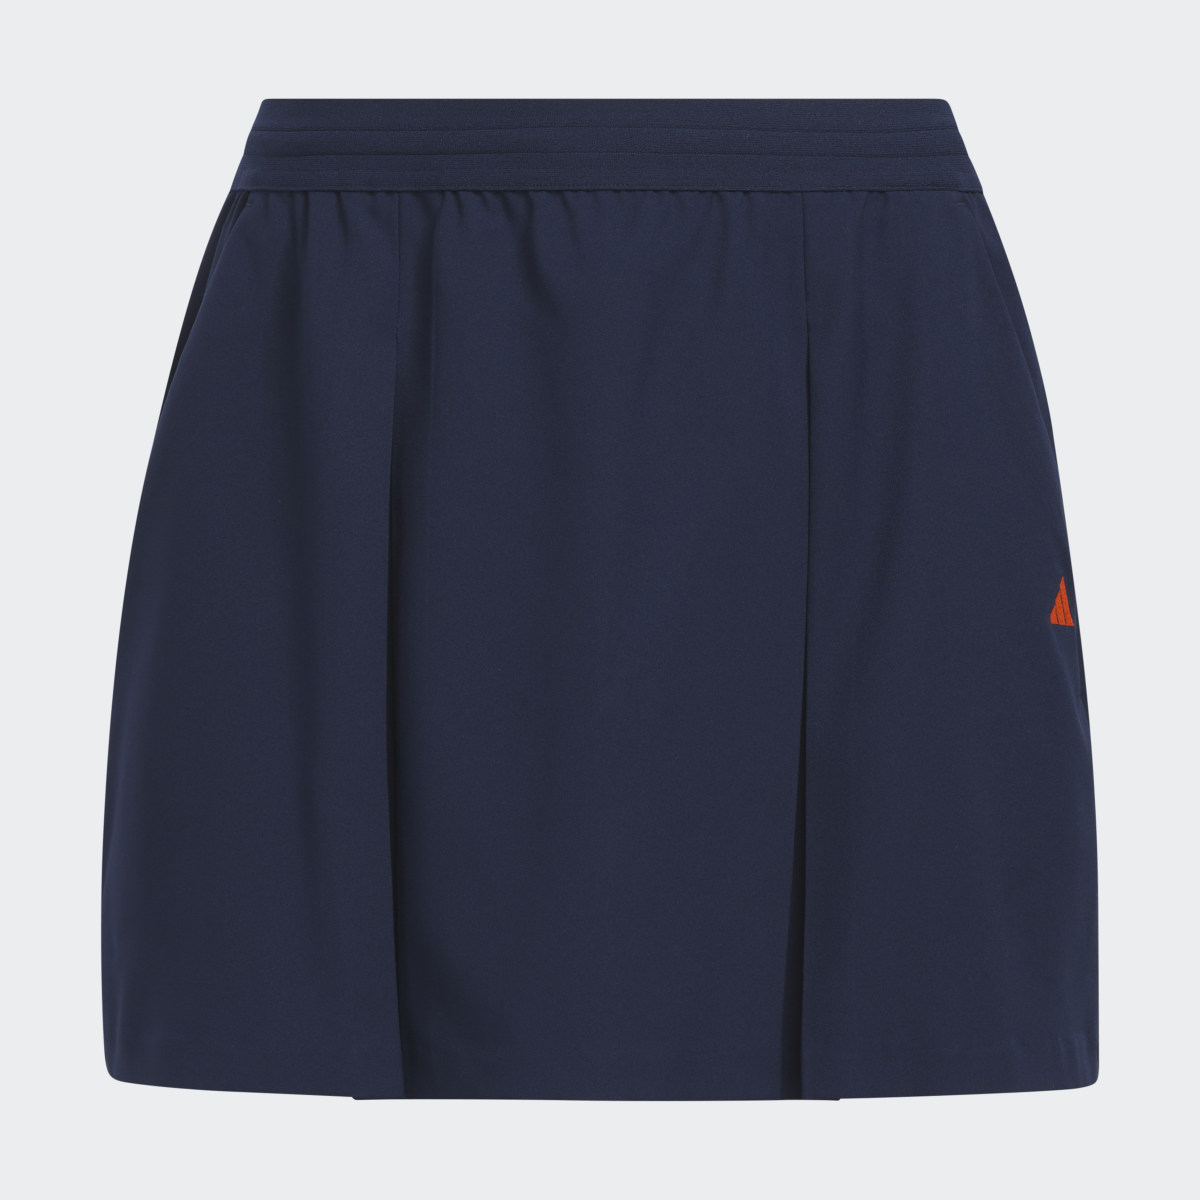 Adidas Made To Be Remade Flare Golf Skirt. 5